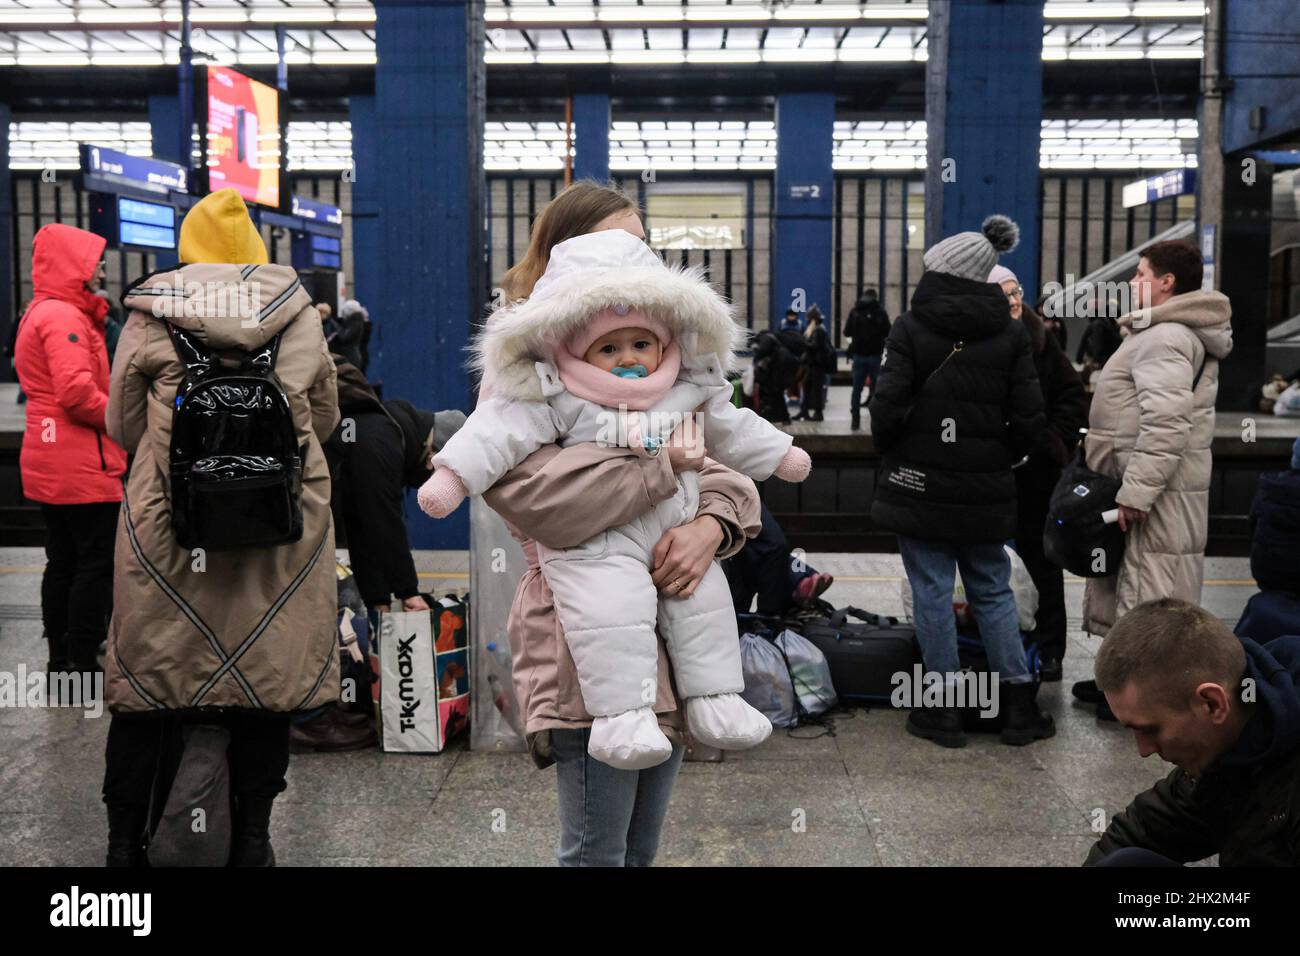 A woman carries her baby in her arms at the train platform of Warszawa Centralna Railway Station, as they wait for transit to other cities and countries for settling down. As war crisis in Ukraine continues, millions of Ukrainians have been fled from their homeland to Poland, most of them are women and children. Most of them temporarily resting in railway stations in Warsaw and awaiting for settling down. According to UN agency, the numbers of refugee migration have hit 1.5 million, which is the fastest-ever since the Second World War. The Polish government have announced a plan of 8 billion z Stock Photo